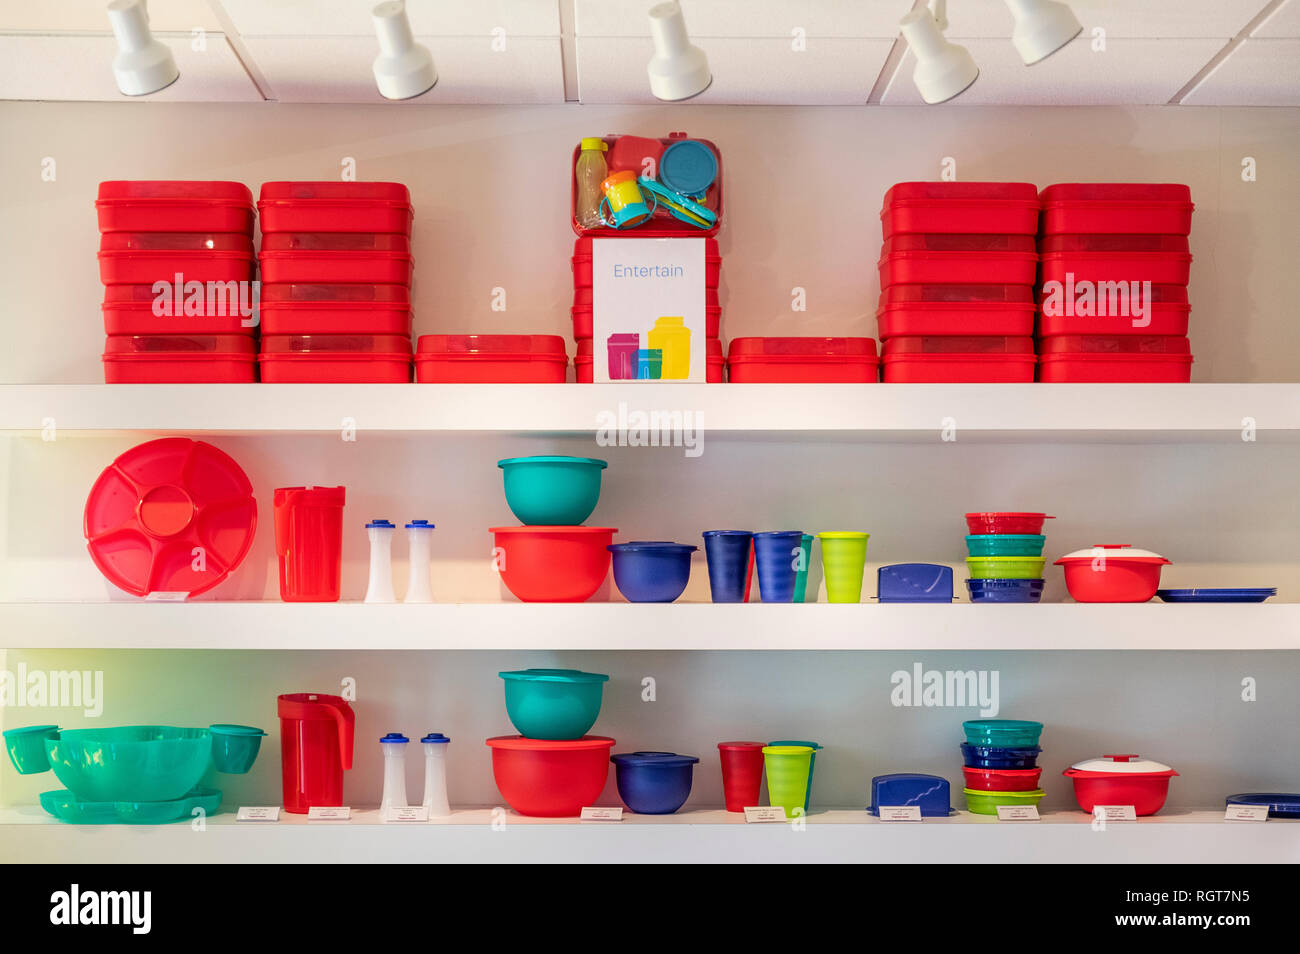 https://c8.alamy.com/comp/RGT7N5/tupperware-storage-products-on-display-at-the-corporate-headquarters-store-kissimmee-florida-usa-RGT7N5.jpg